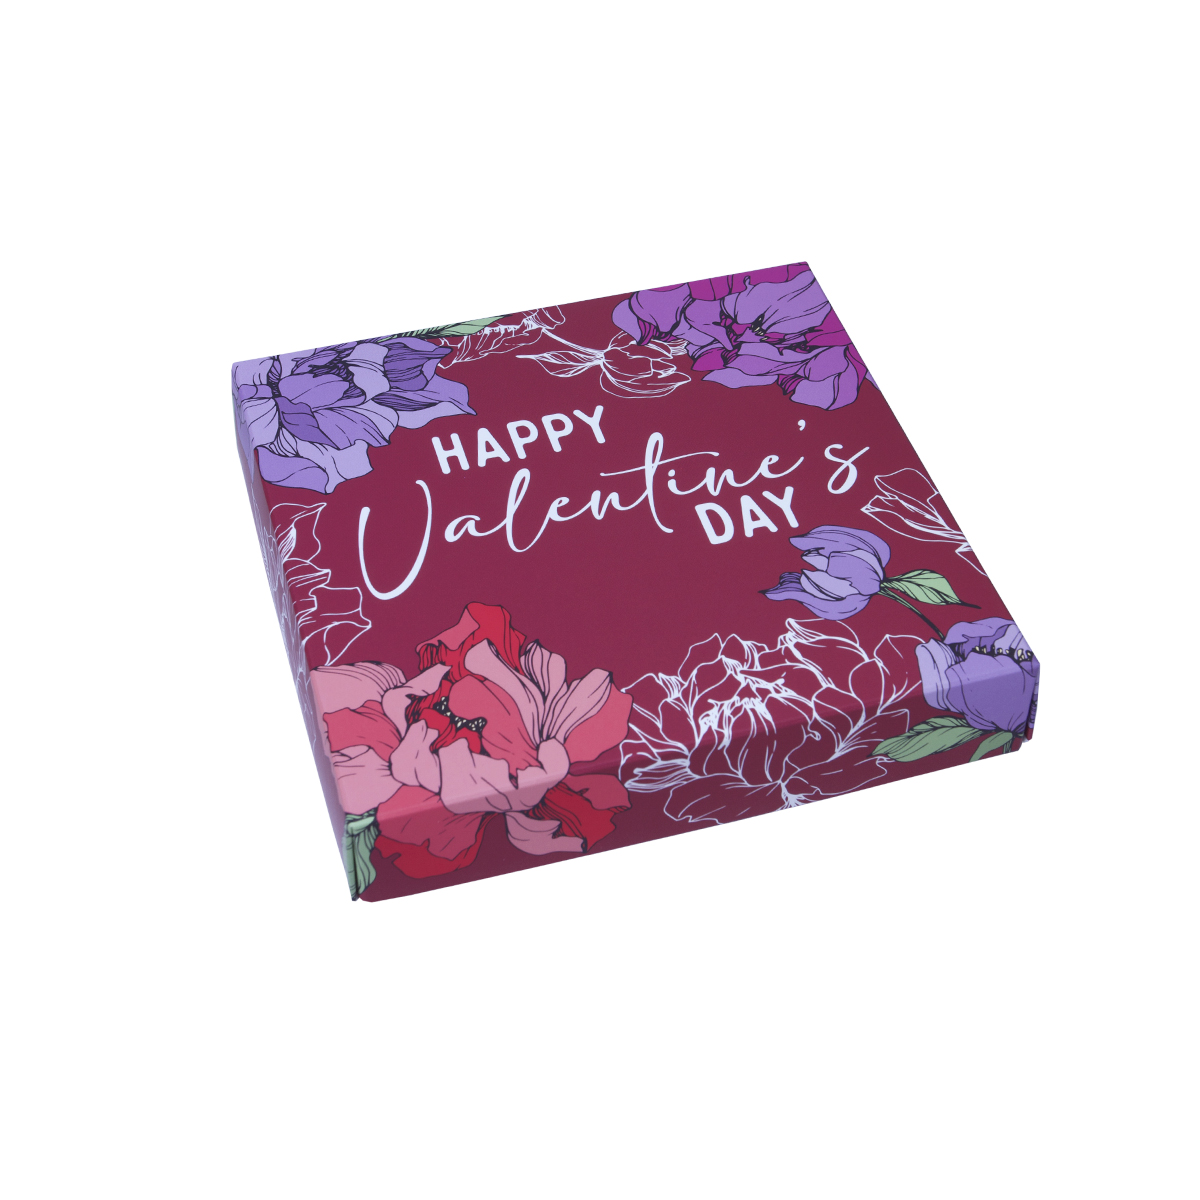 Happy Valentine's Day Gift Box with Assorted Sugar Free Chocolate